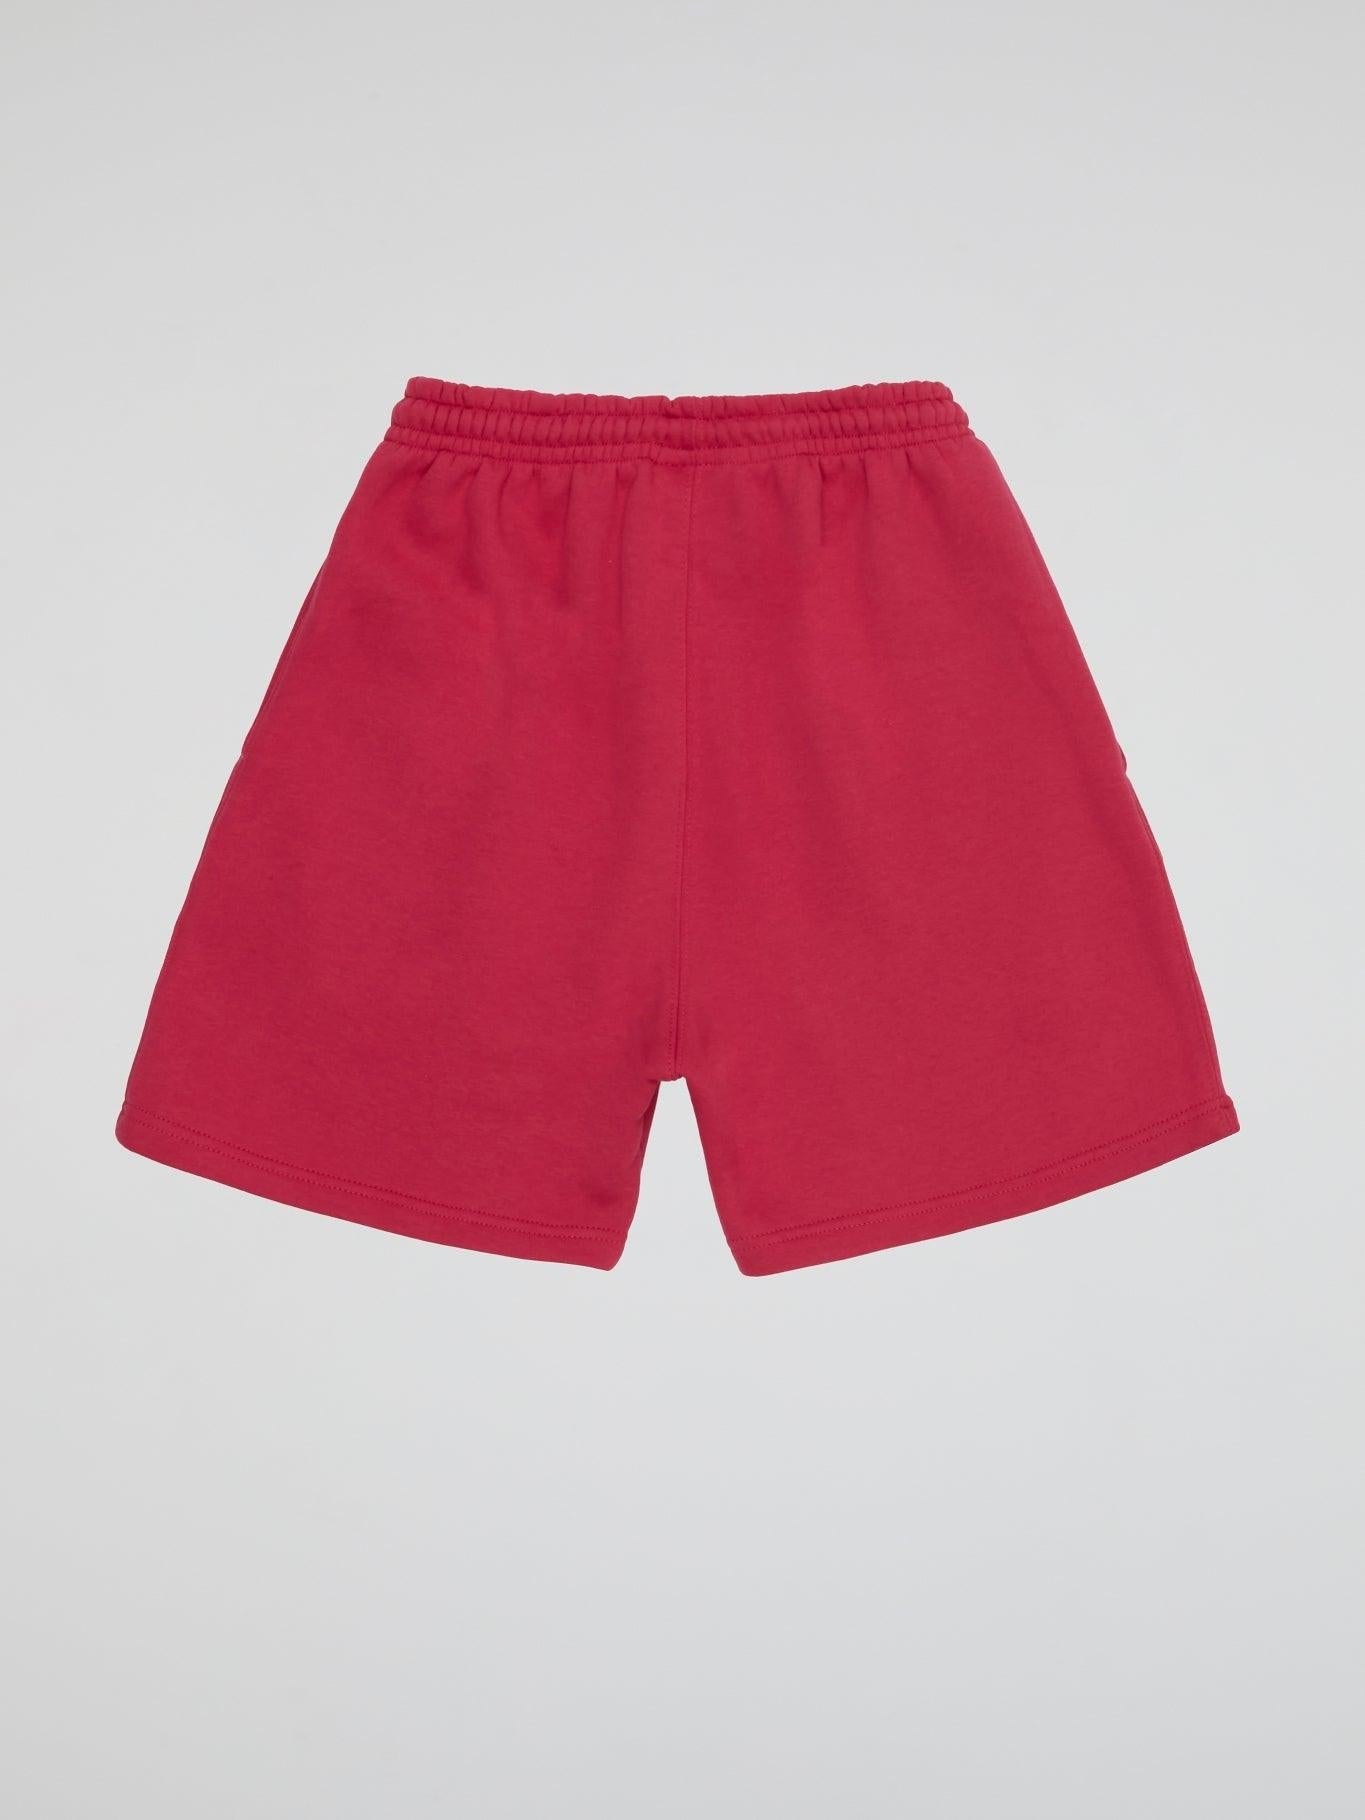 BHYPE LOGO ESSENTIALS NEON PINK SHORTS - B-Hype Society